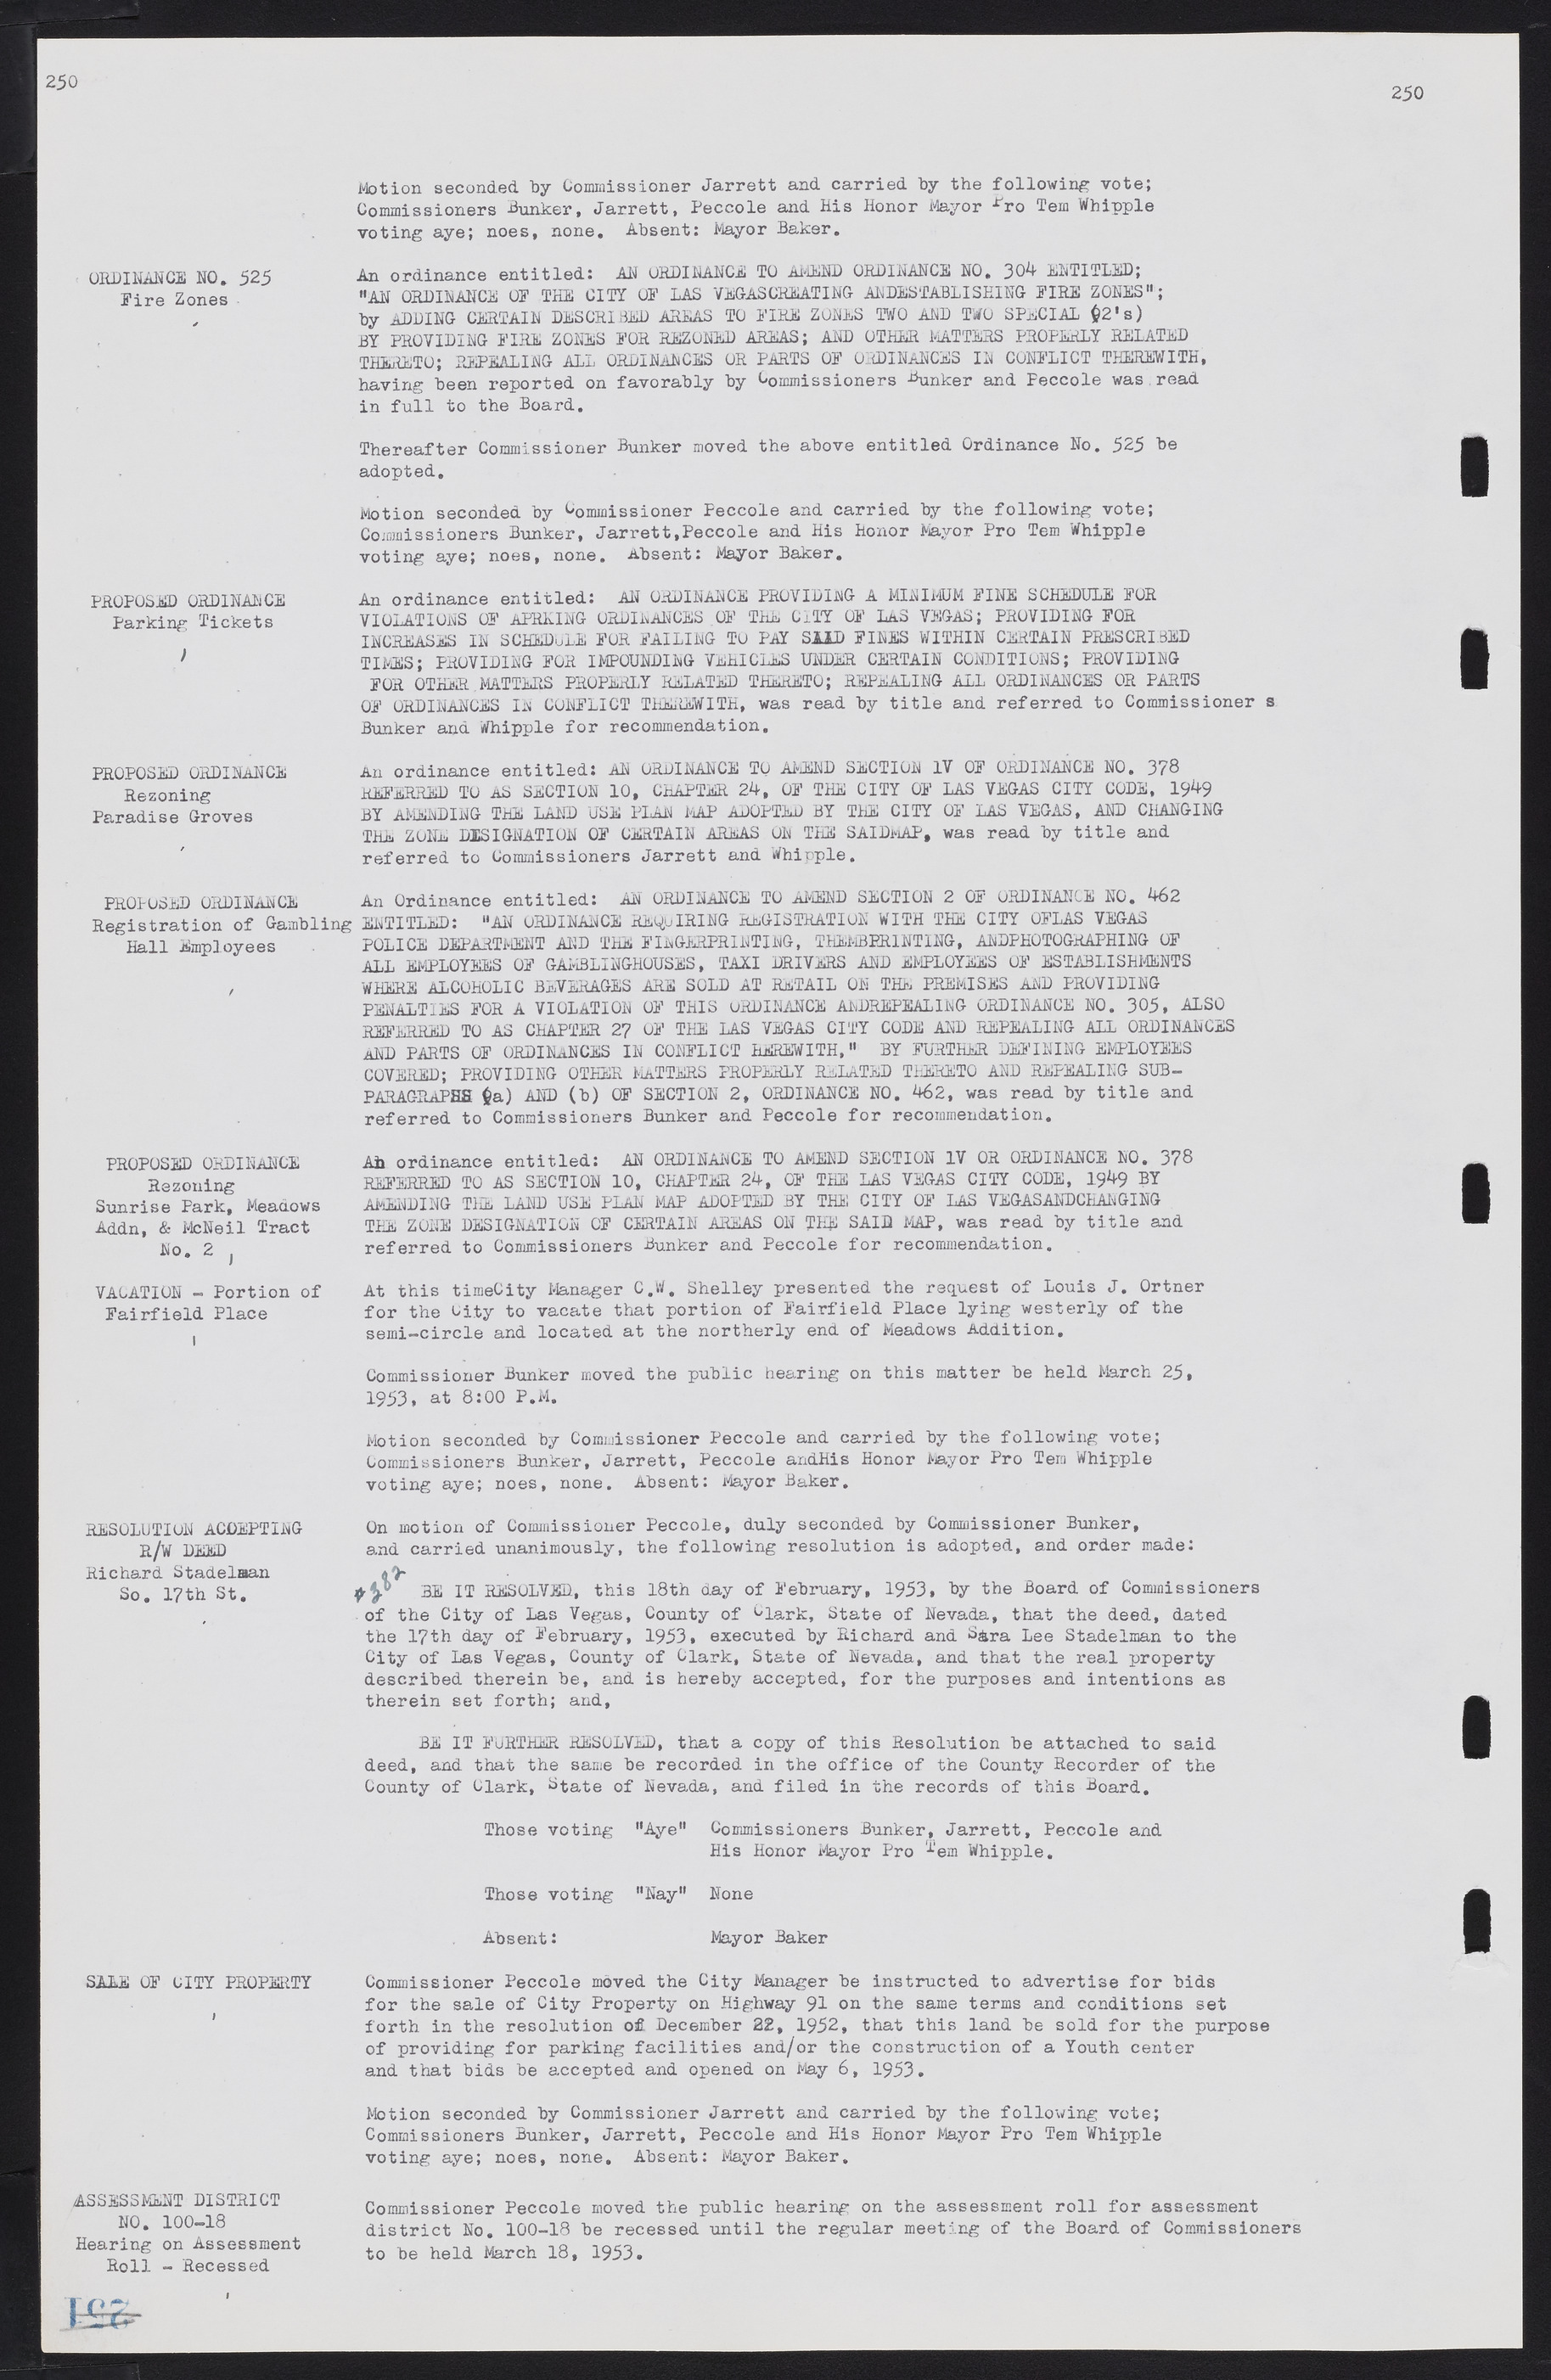 Las Vegas City Commission Minutes, May 26, 1952 to February 17, 1954, lvc000008-266